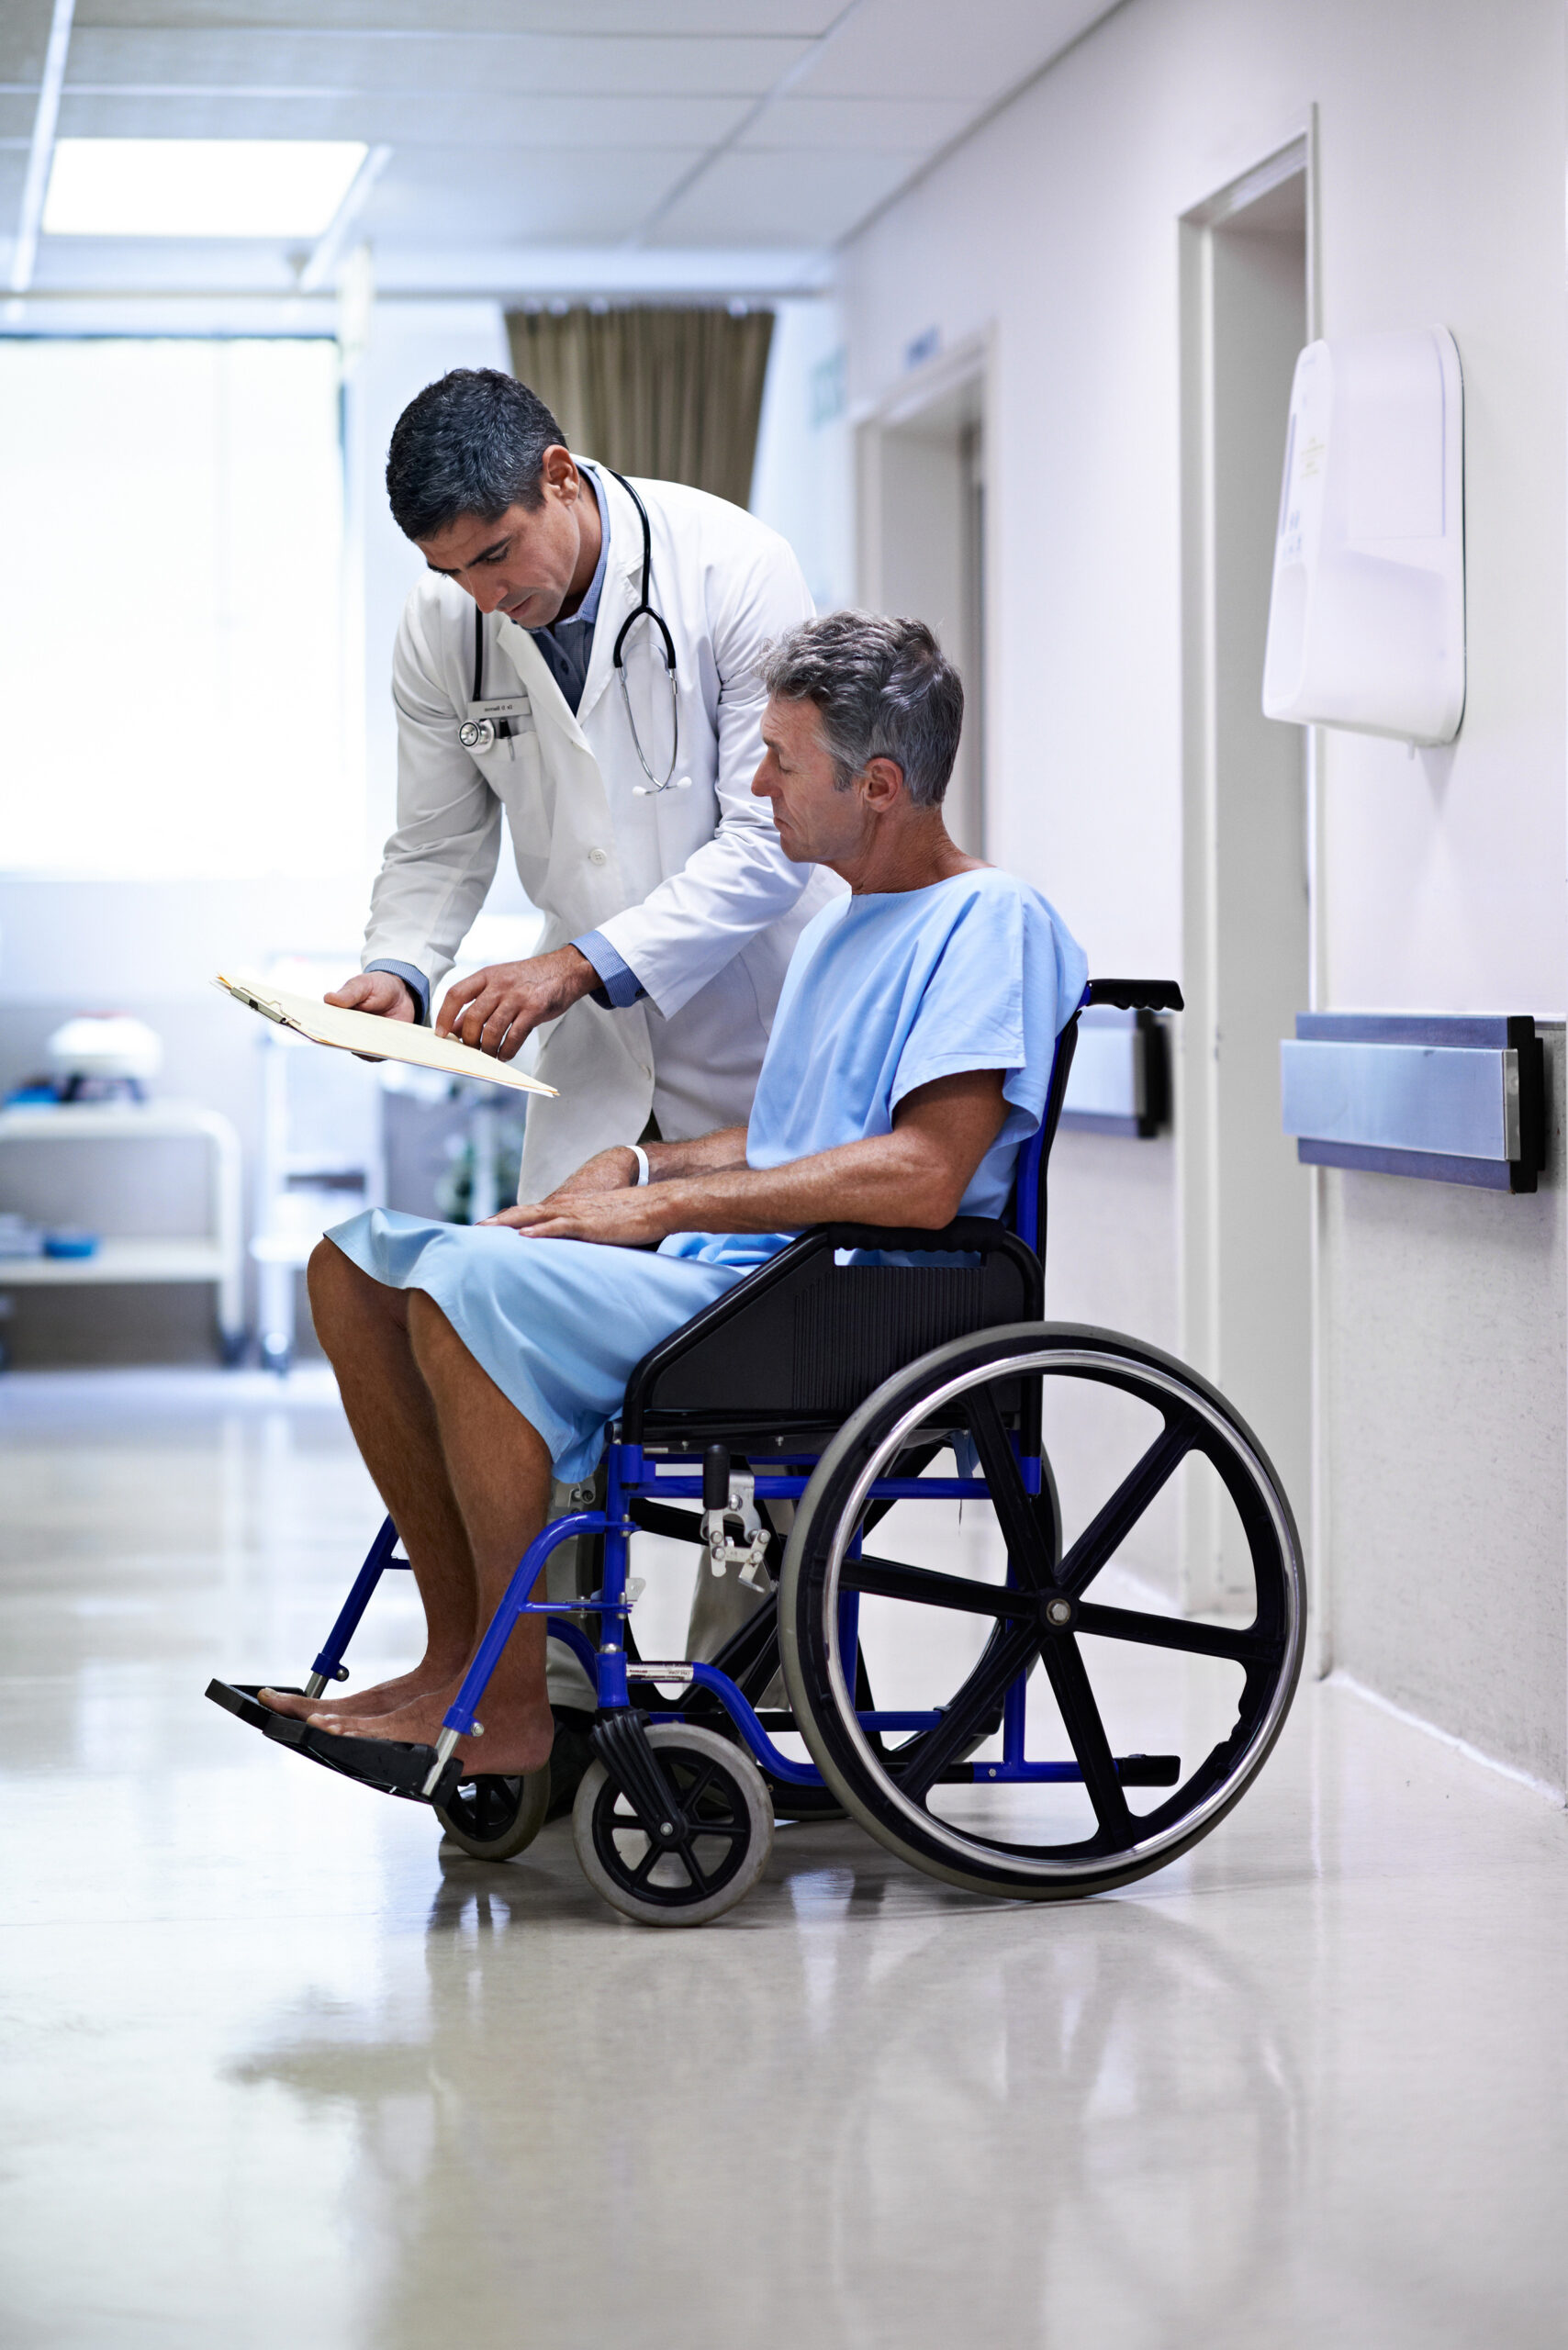 A man in a hospital gown sitting in a wheelchair listens to his doctor, who leans next to him with a clip board. If you have life-changing health problems, the Oklahoma disability lawyers at Troutman & Troutman can help you seek financial relief.